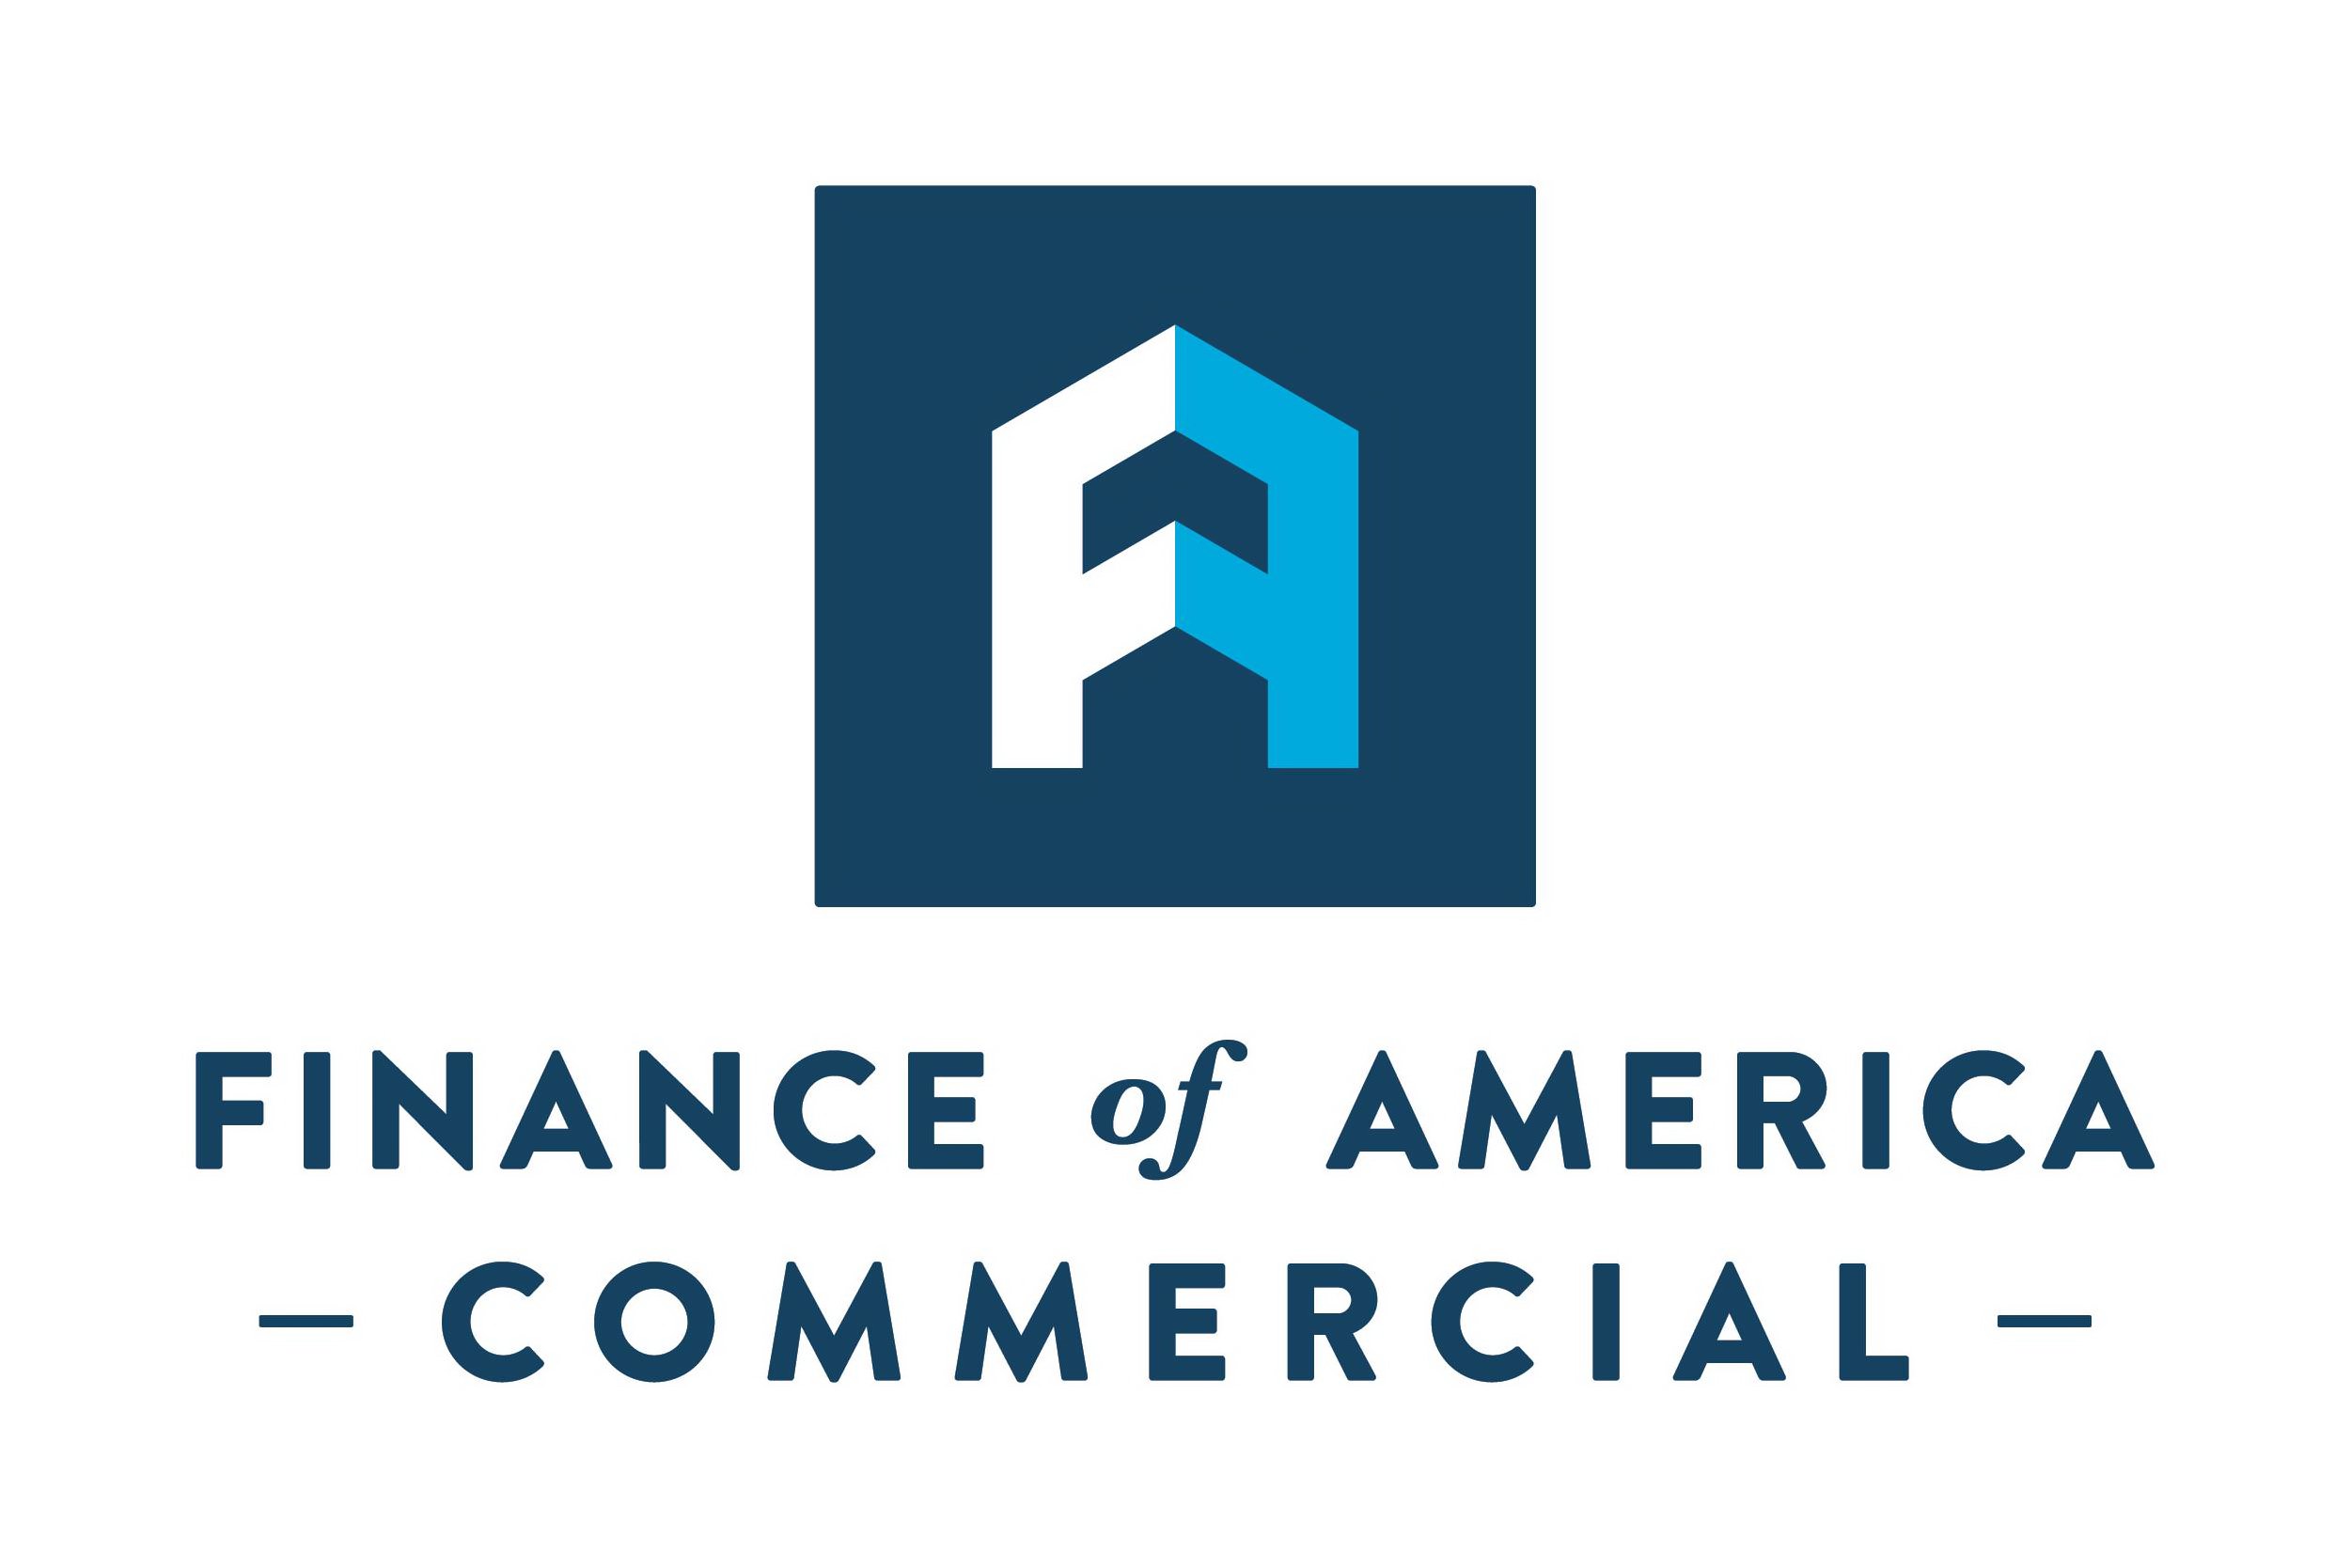  FA FINANCE OF AMERICA - COMMERCIAL -